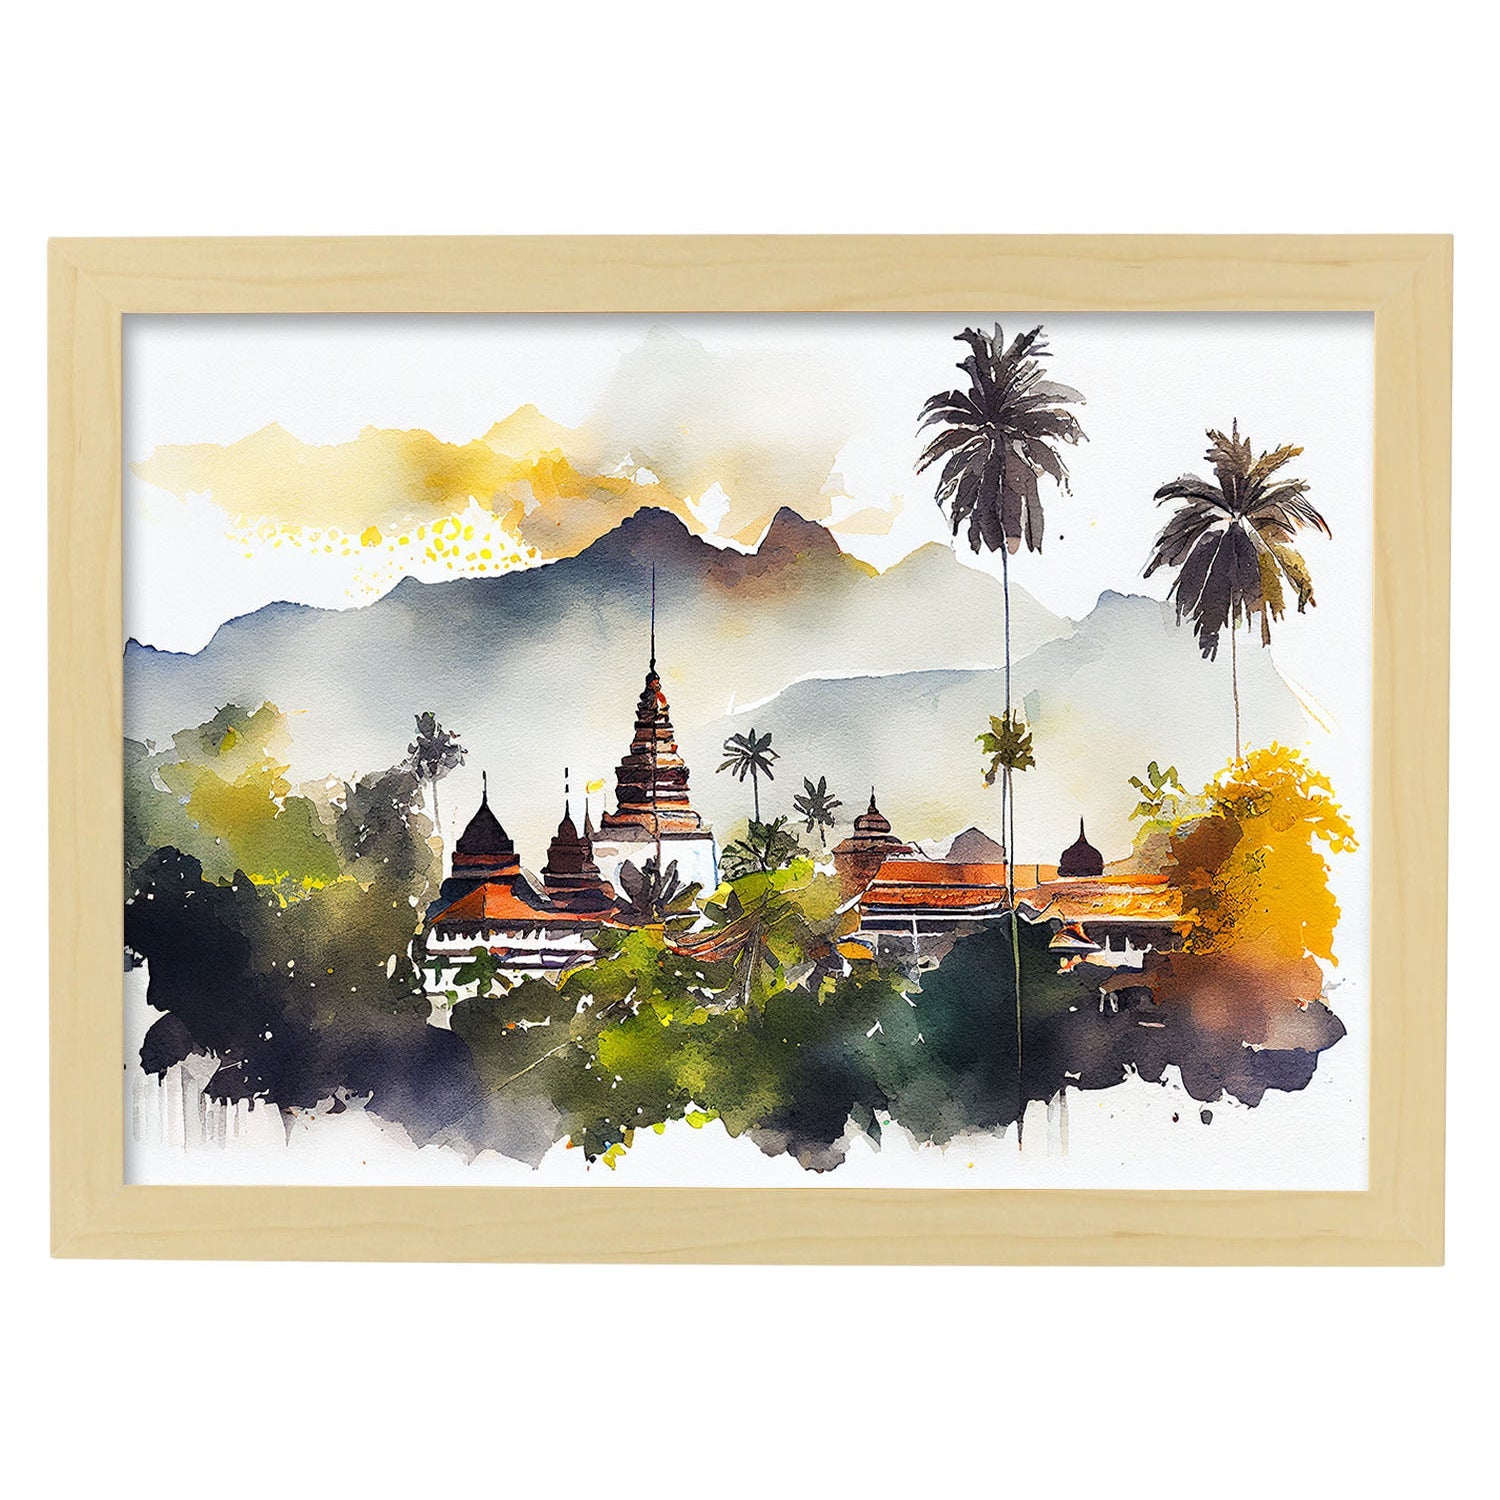 Nacnic watercolor of a skyline of the city of Luang Prabang. Aesthetic Wall Art Prints for Bedroom or Living Room Design.-Artwork-Nacnic-A4-Marco Madera Clara-Nacnic Estudio SL